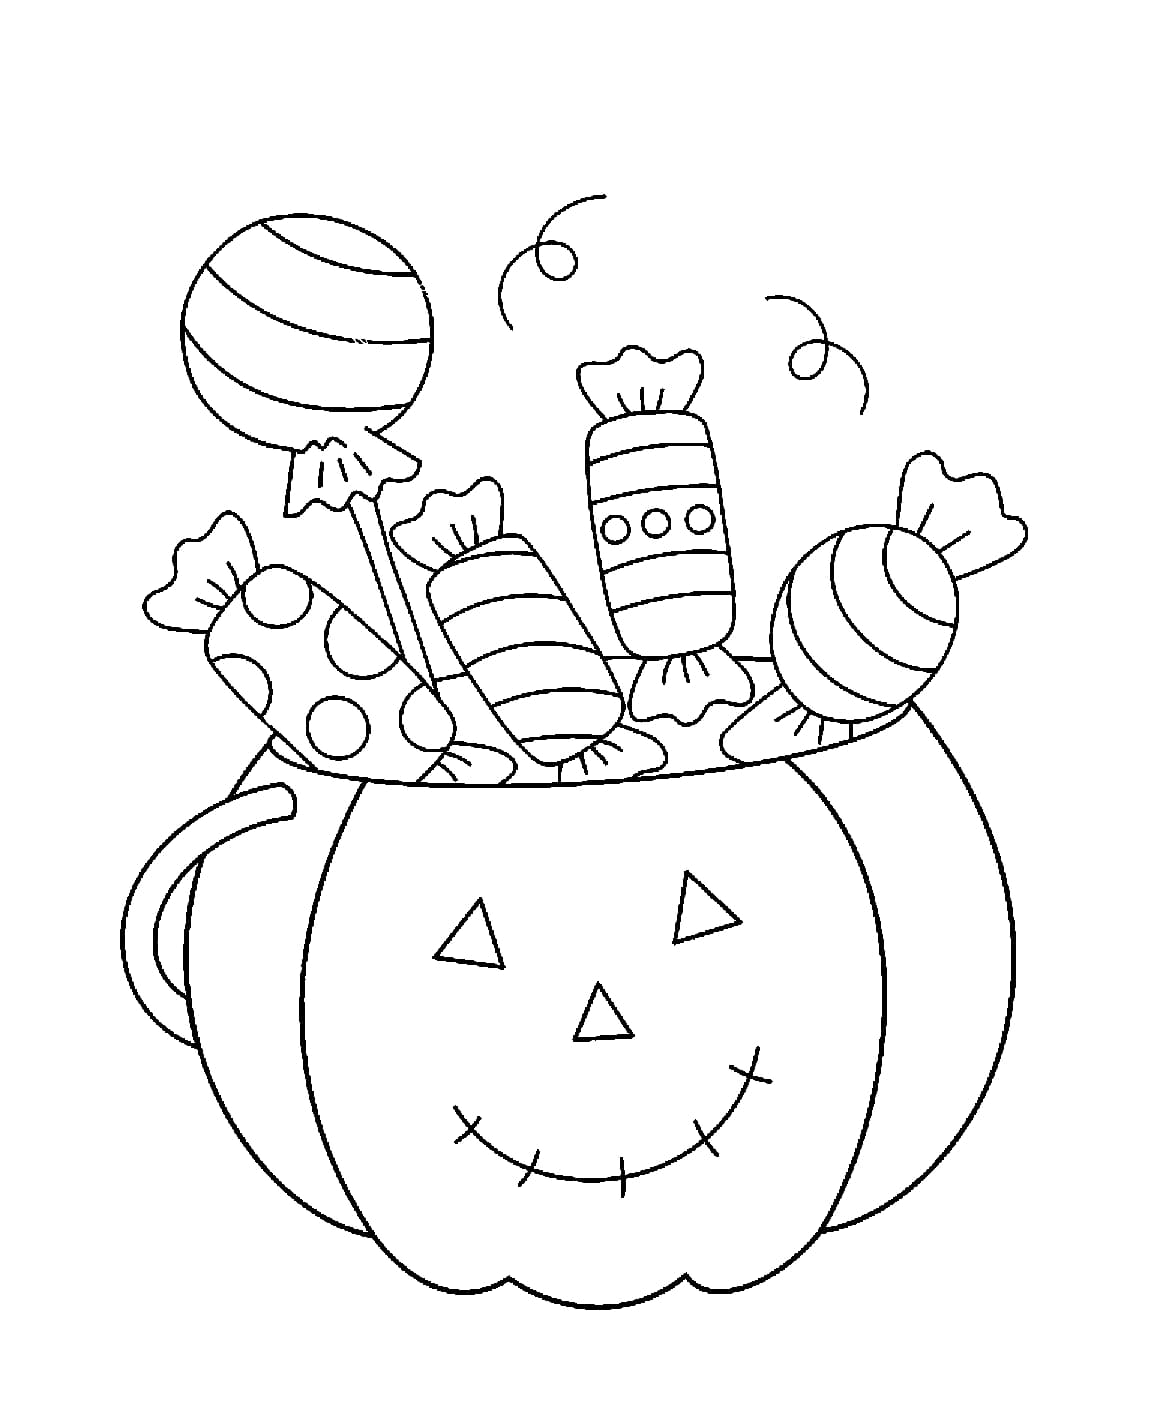 Pumpkin coloring pages | 90 Free printable coloring pages